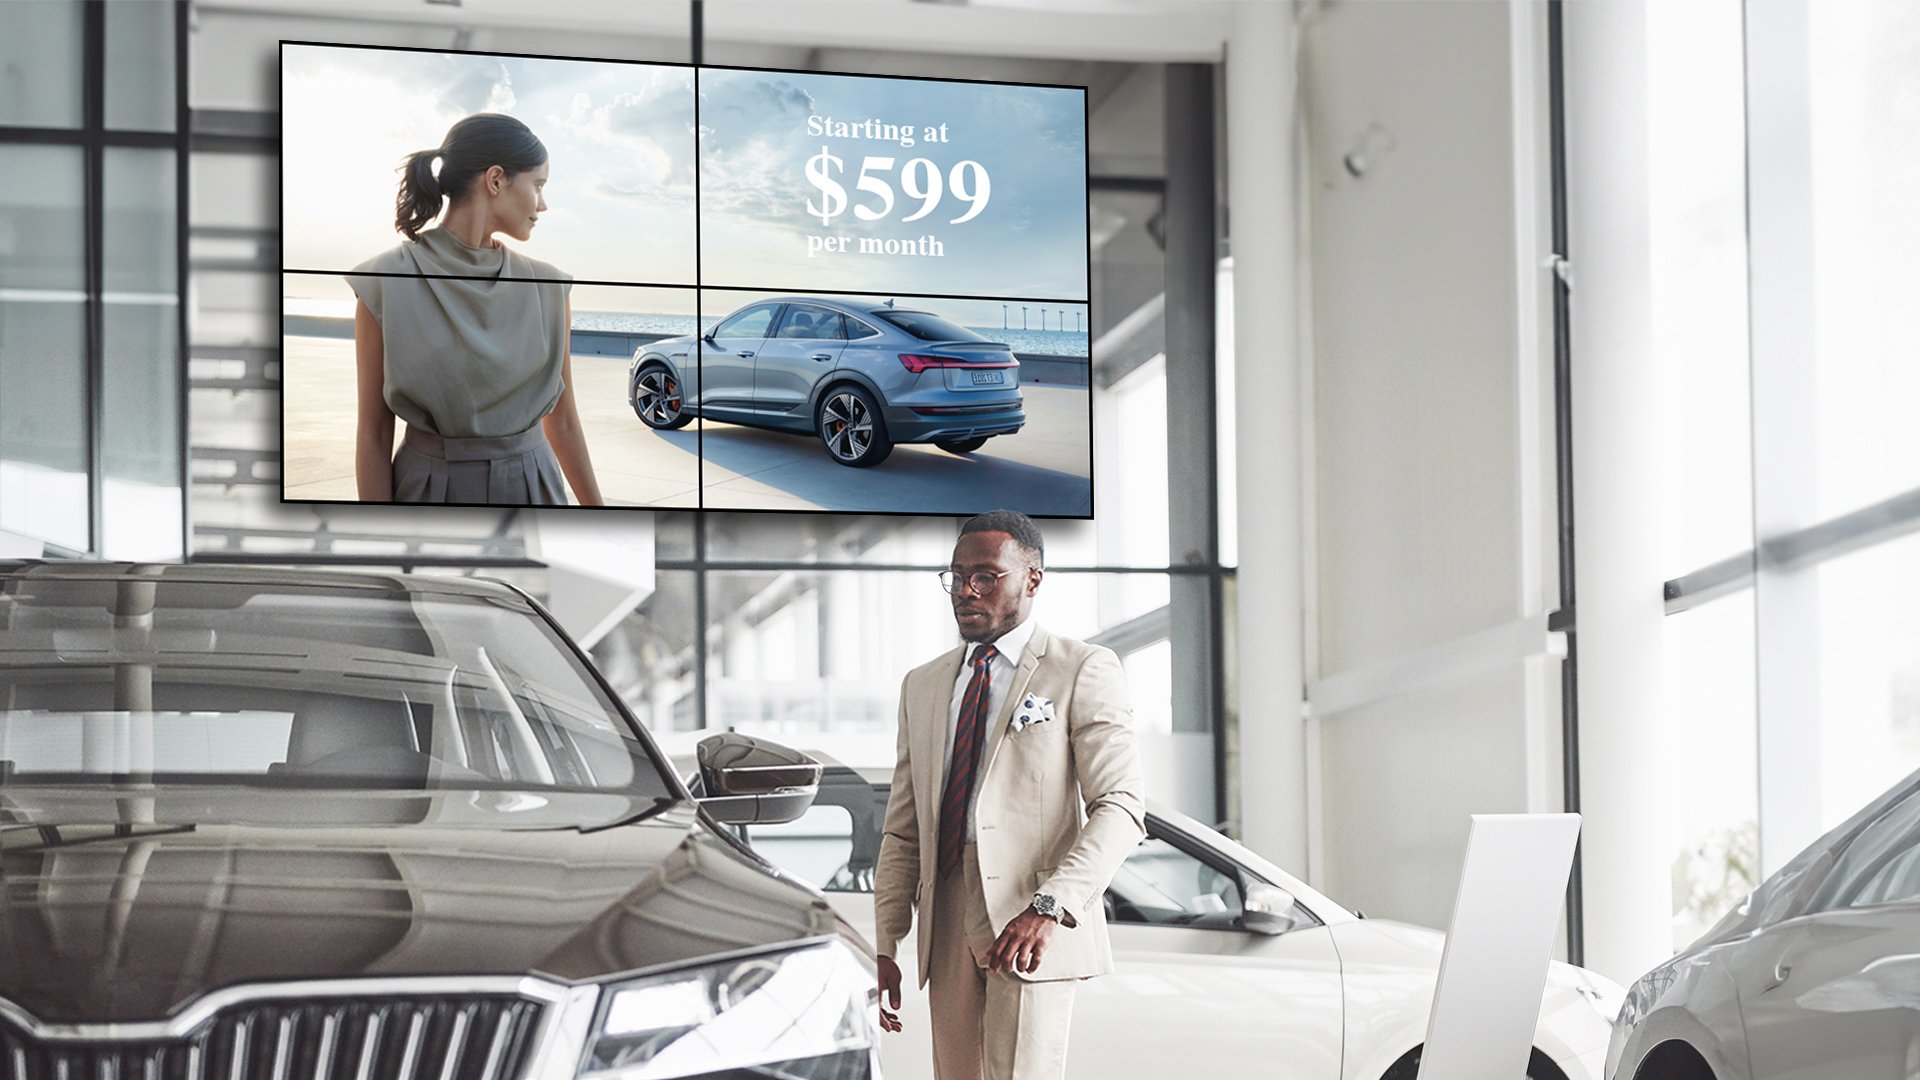 The impacts of digital signage in car dealerships